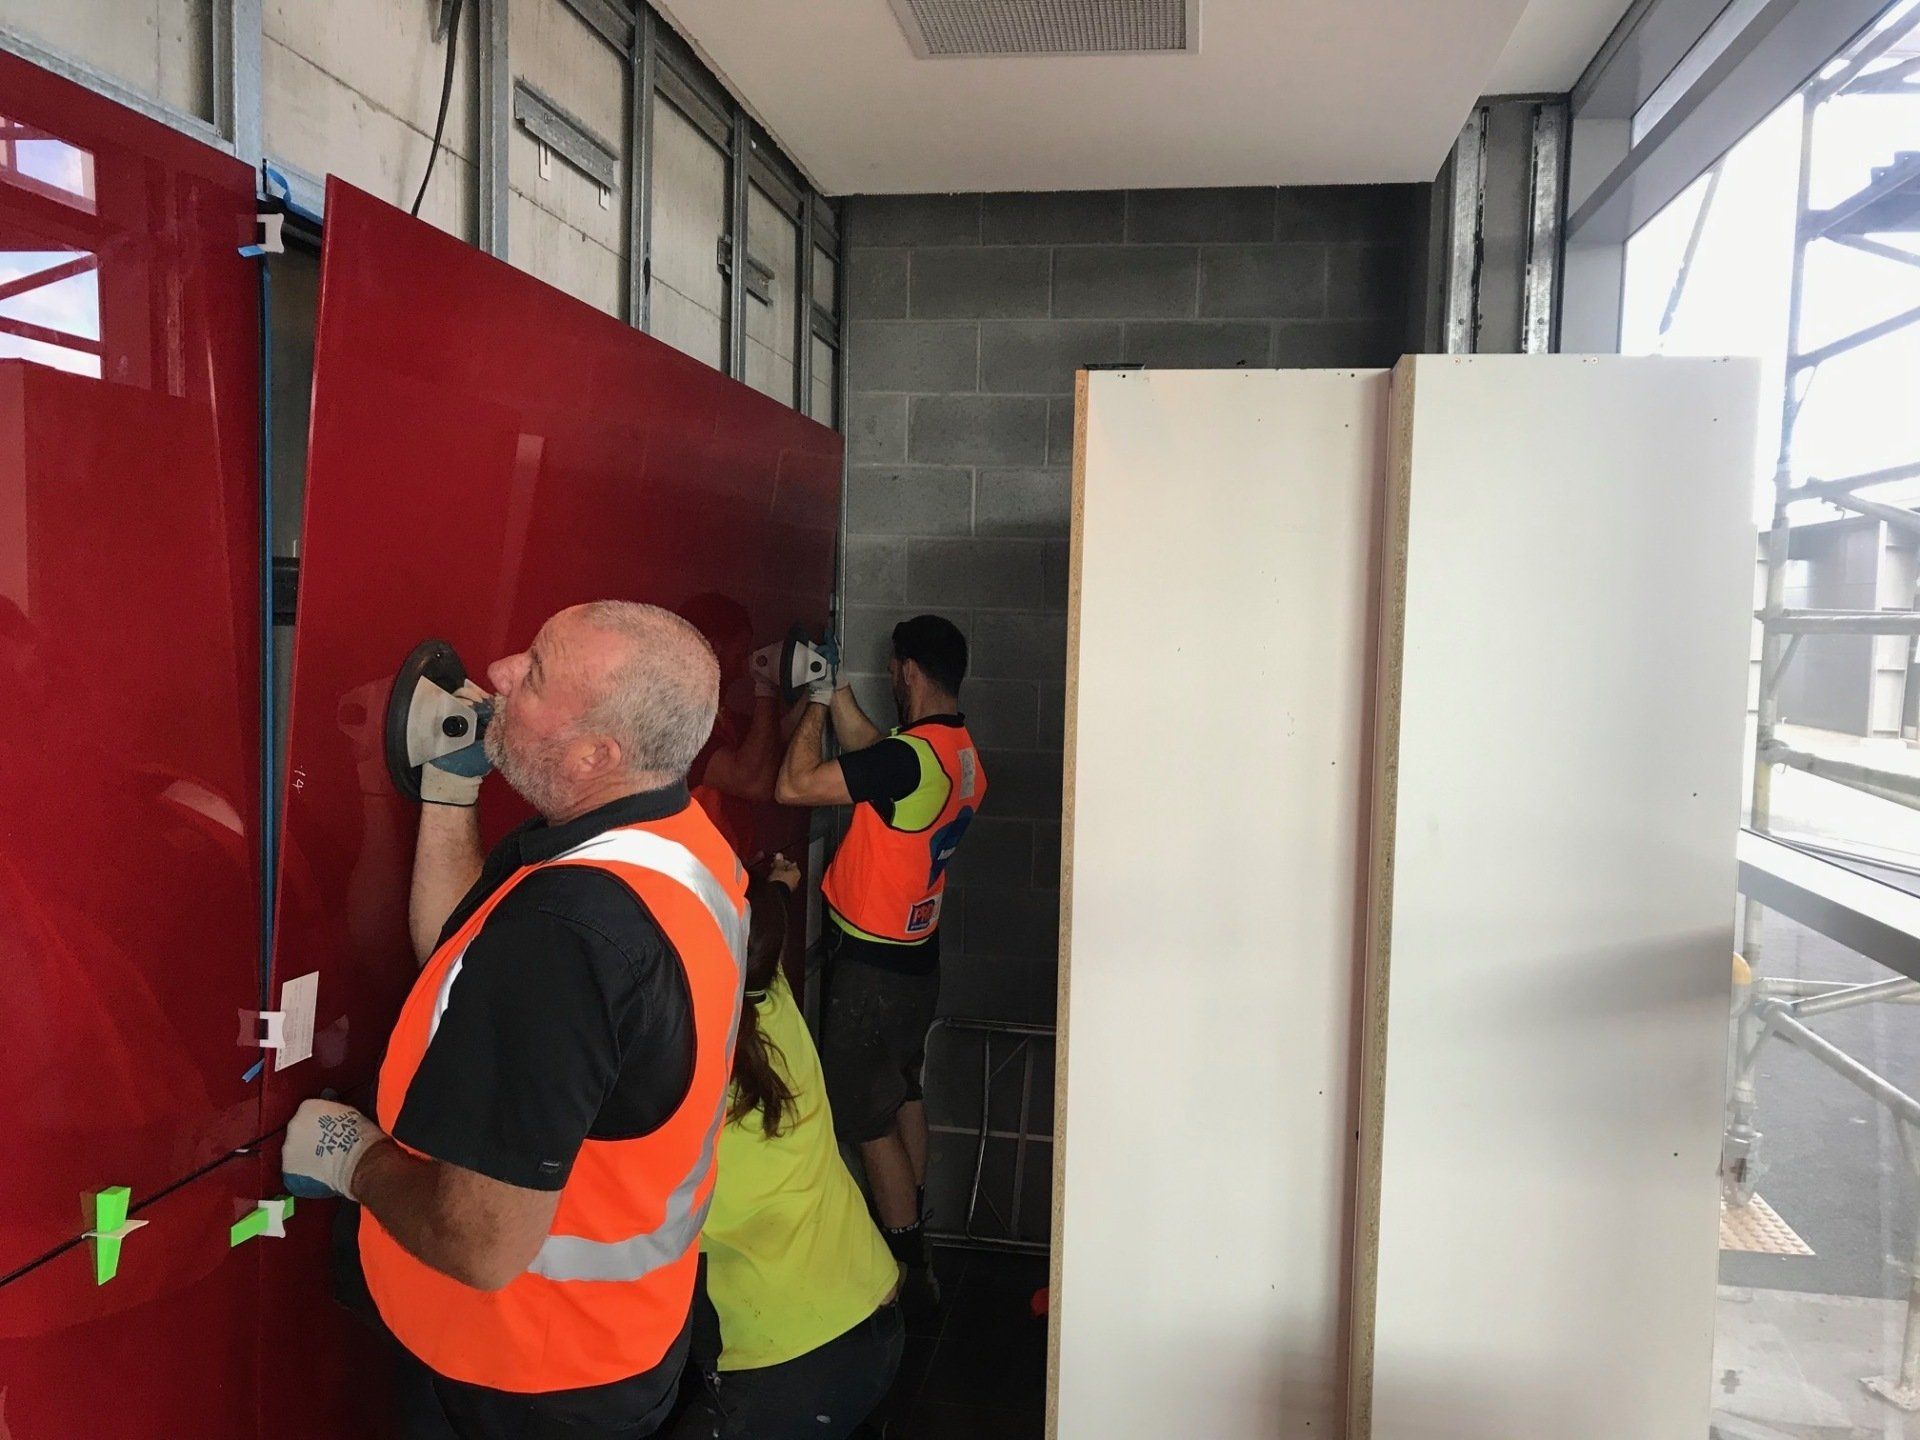 Staffs working on glass — Installing, repairing and manufacturing glass in Cessnock, NSW